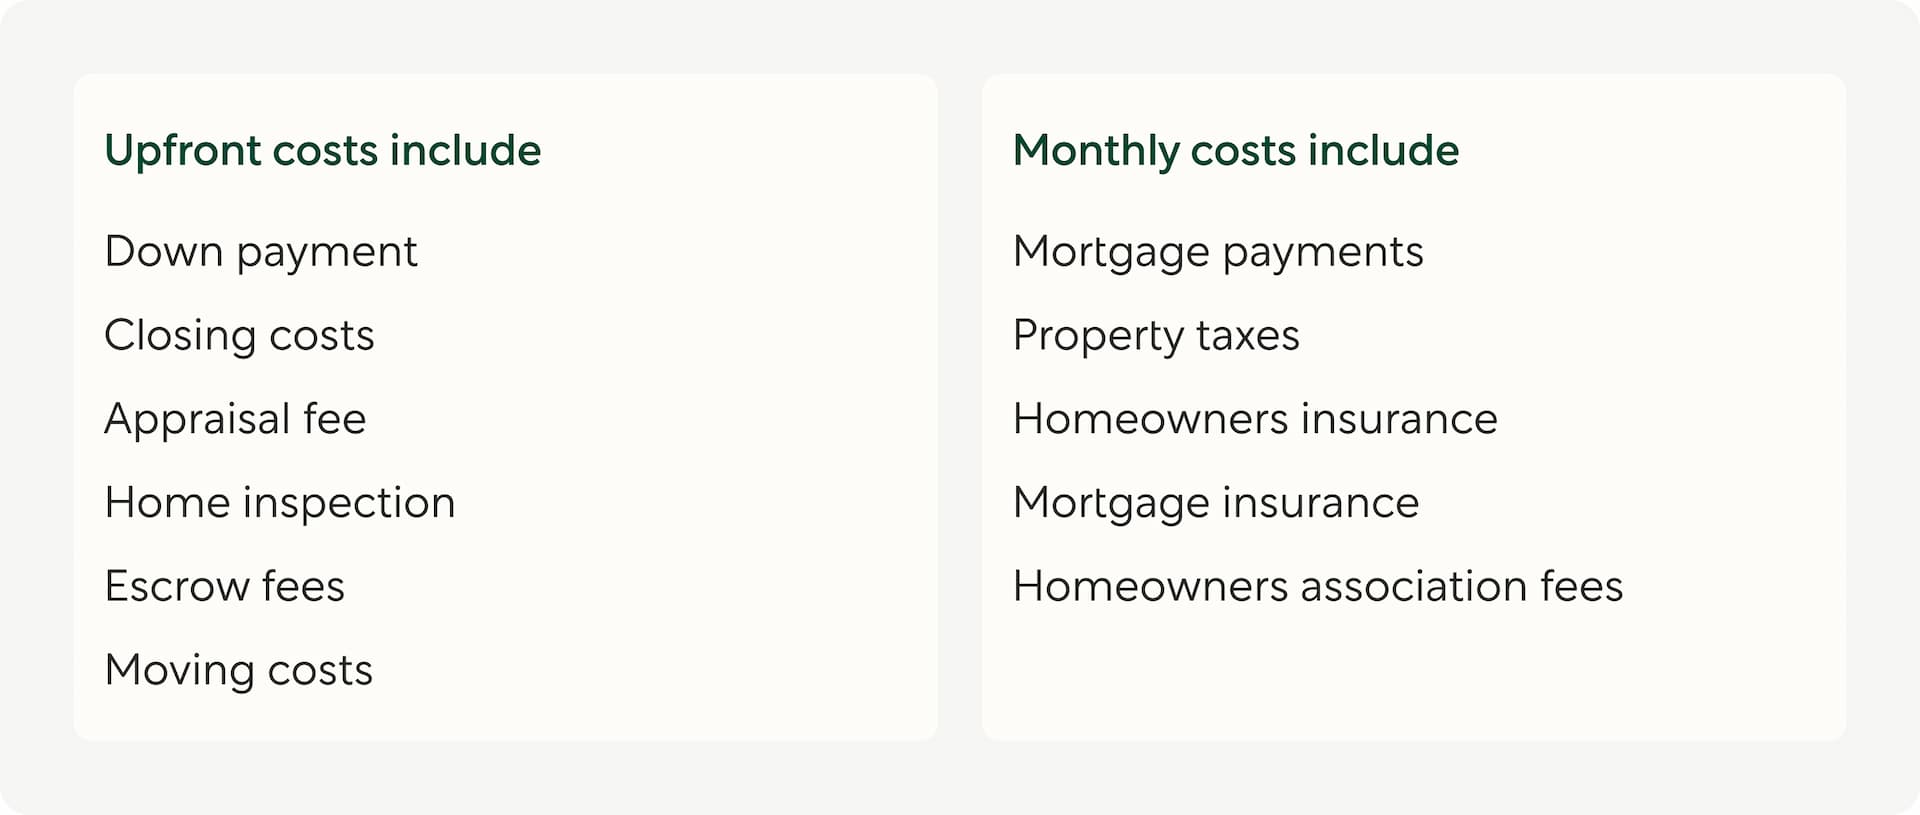 Upfront and monthly costs of owning a home